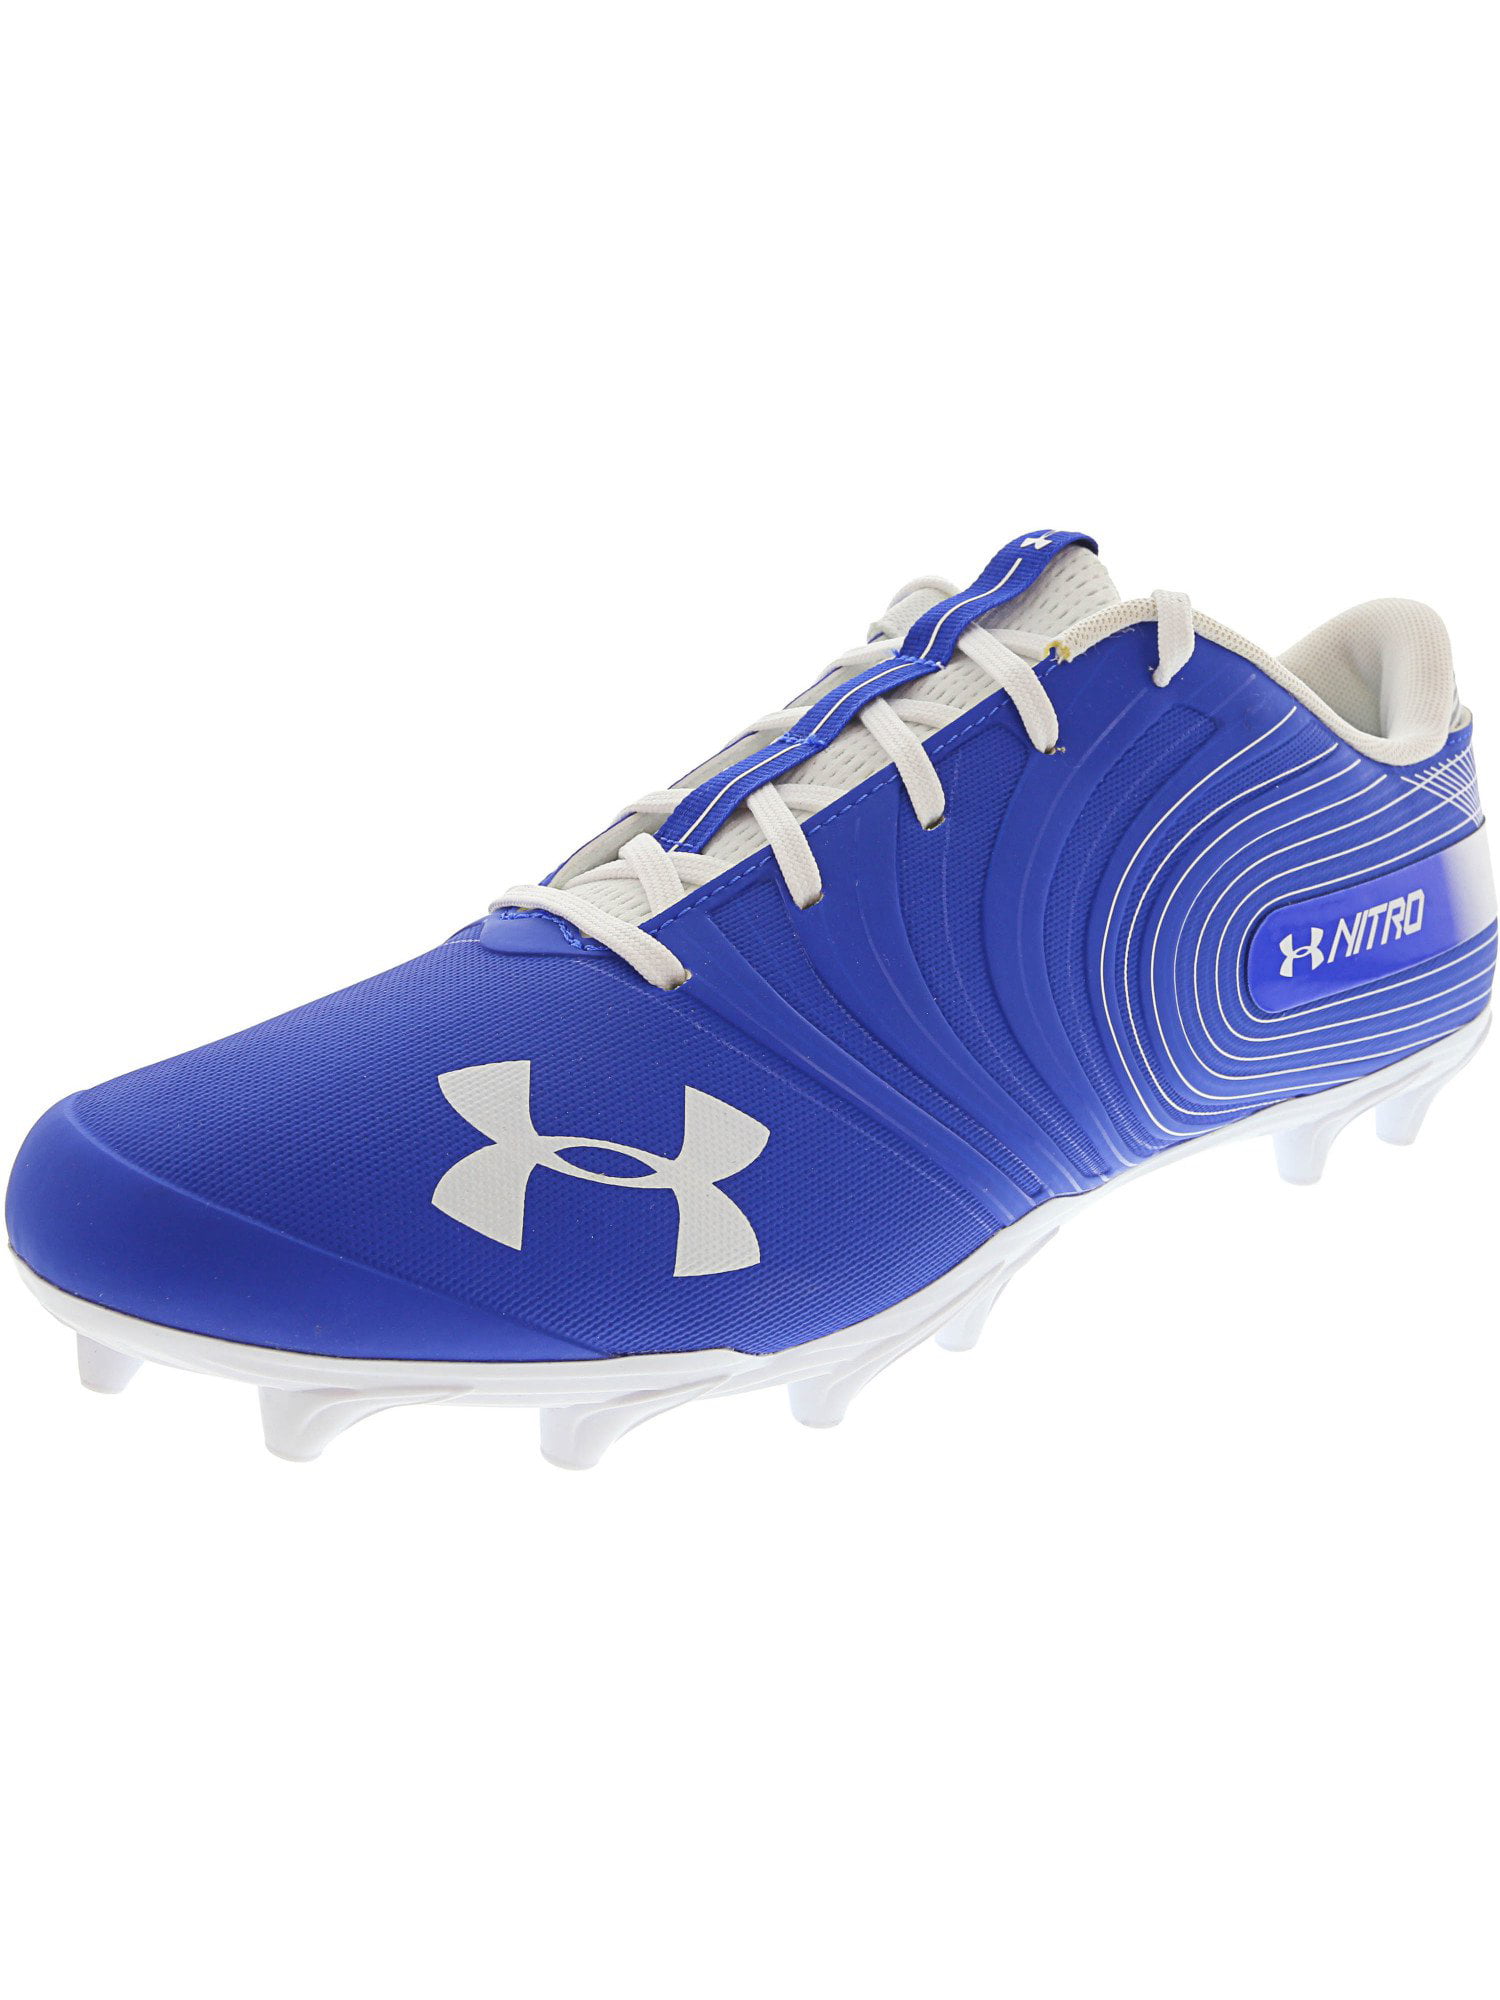 Brand New Under Armour Men's Team Nitro Low MC Wide Football Cleats 